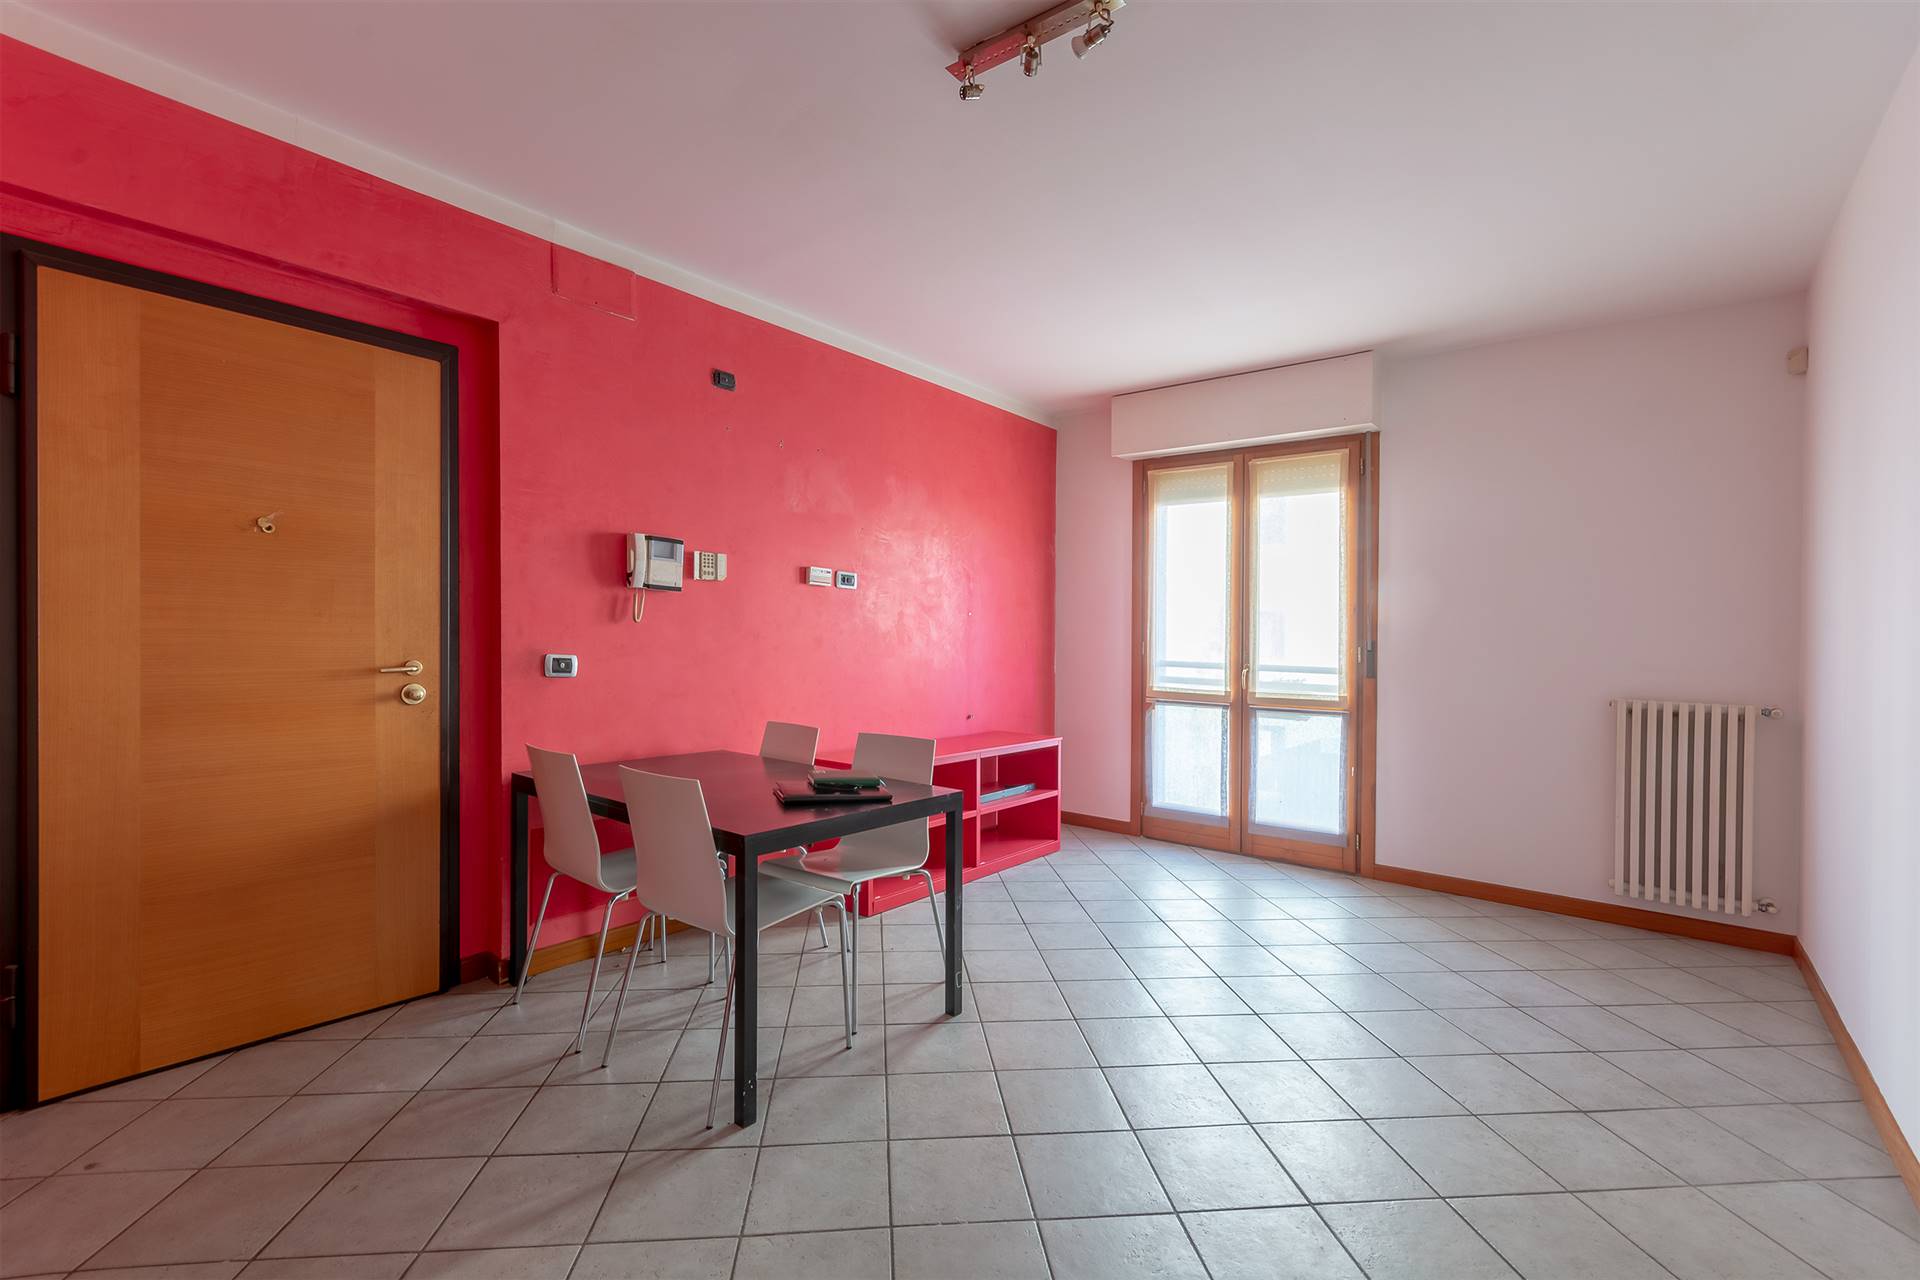 PORTA A PRATO, FIRENZE, Apartment for sale of 66 Sq. mt., Good condition, Heating Individual heating system, Energetic class: G, placed at 2° on 5, 